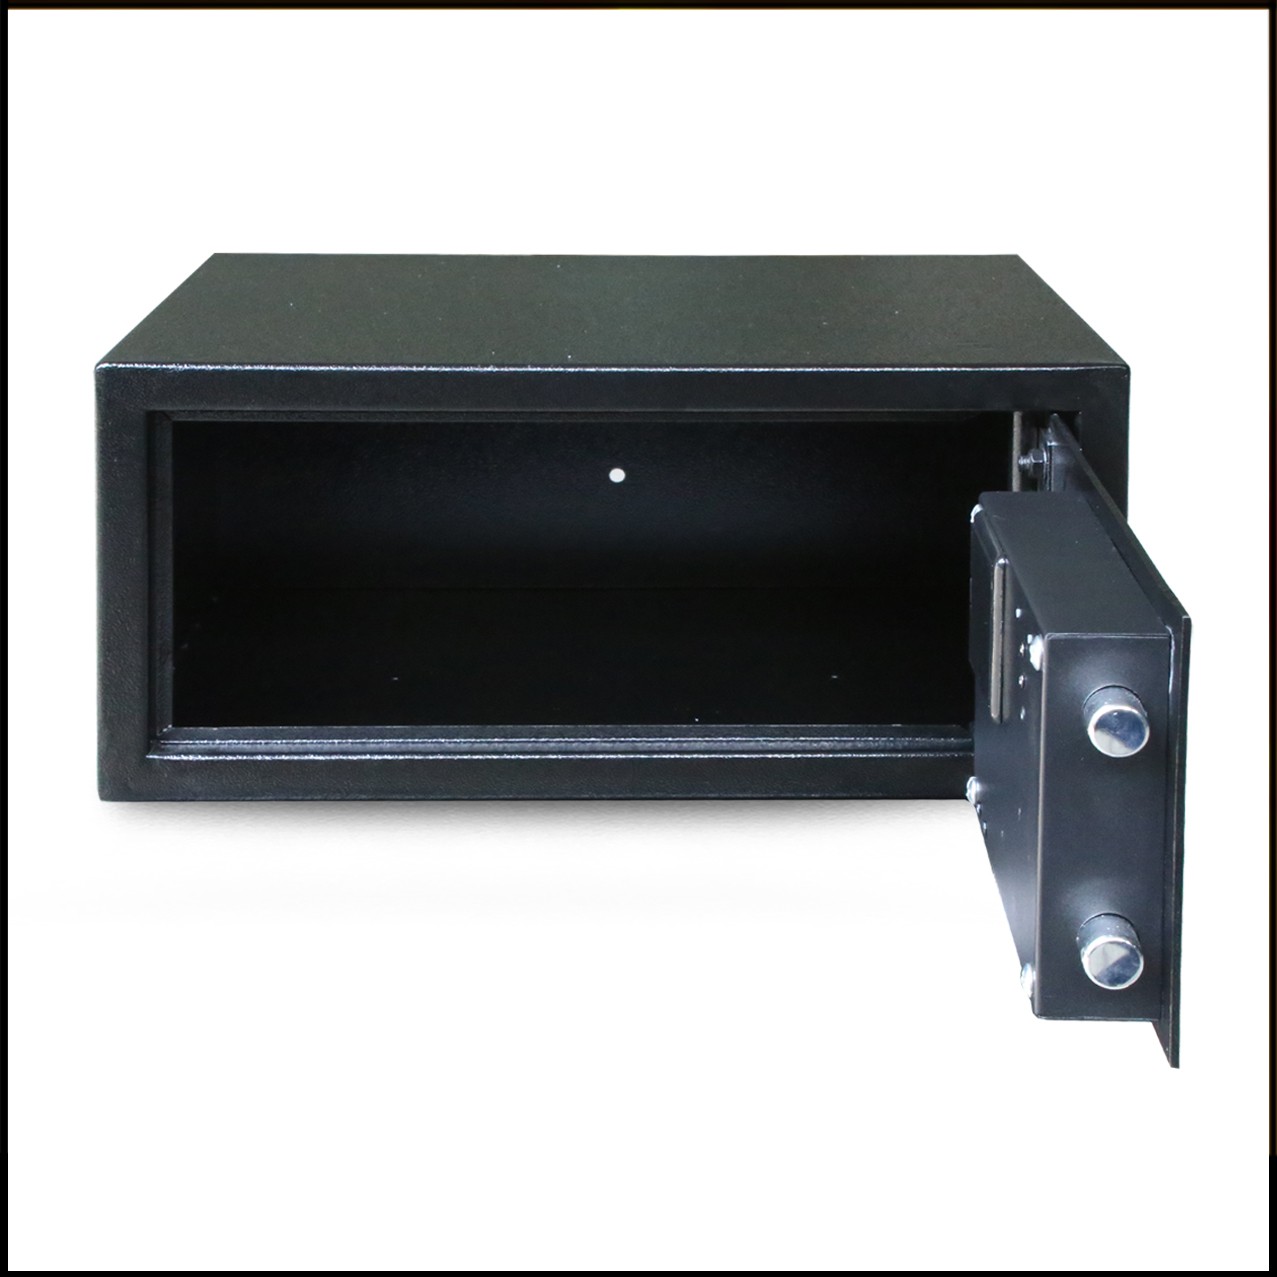 Best Sellers In Hotel Safes